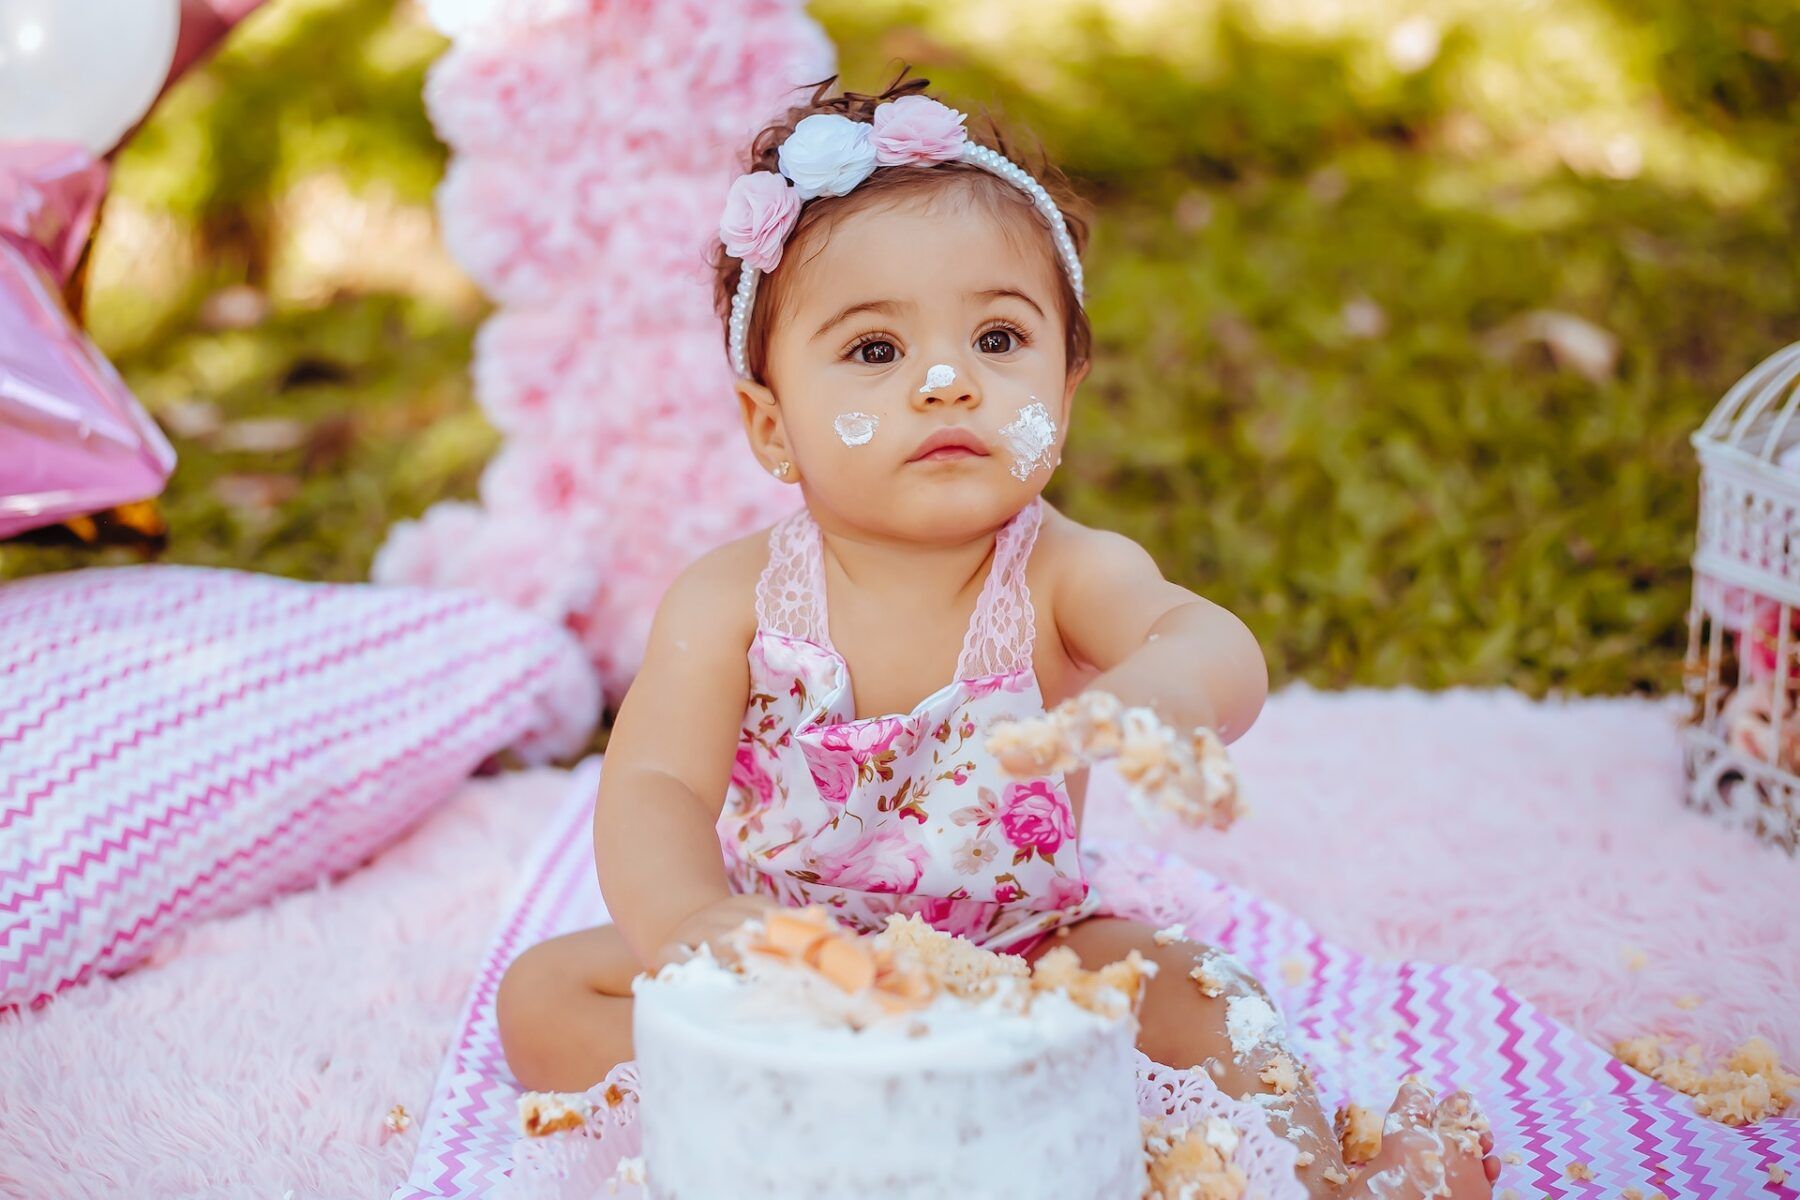 Little girl with cake on her face.